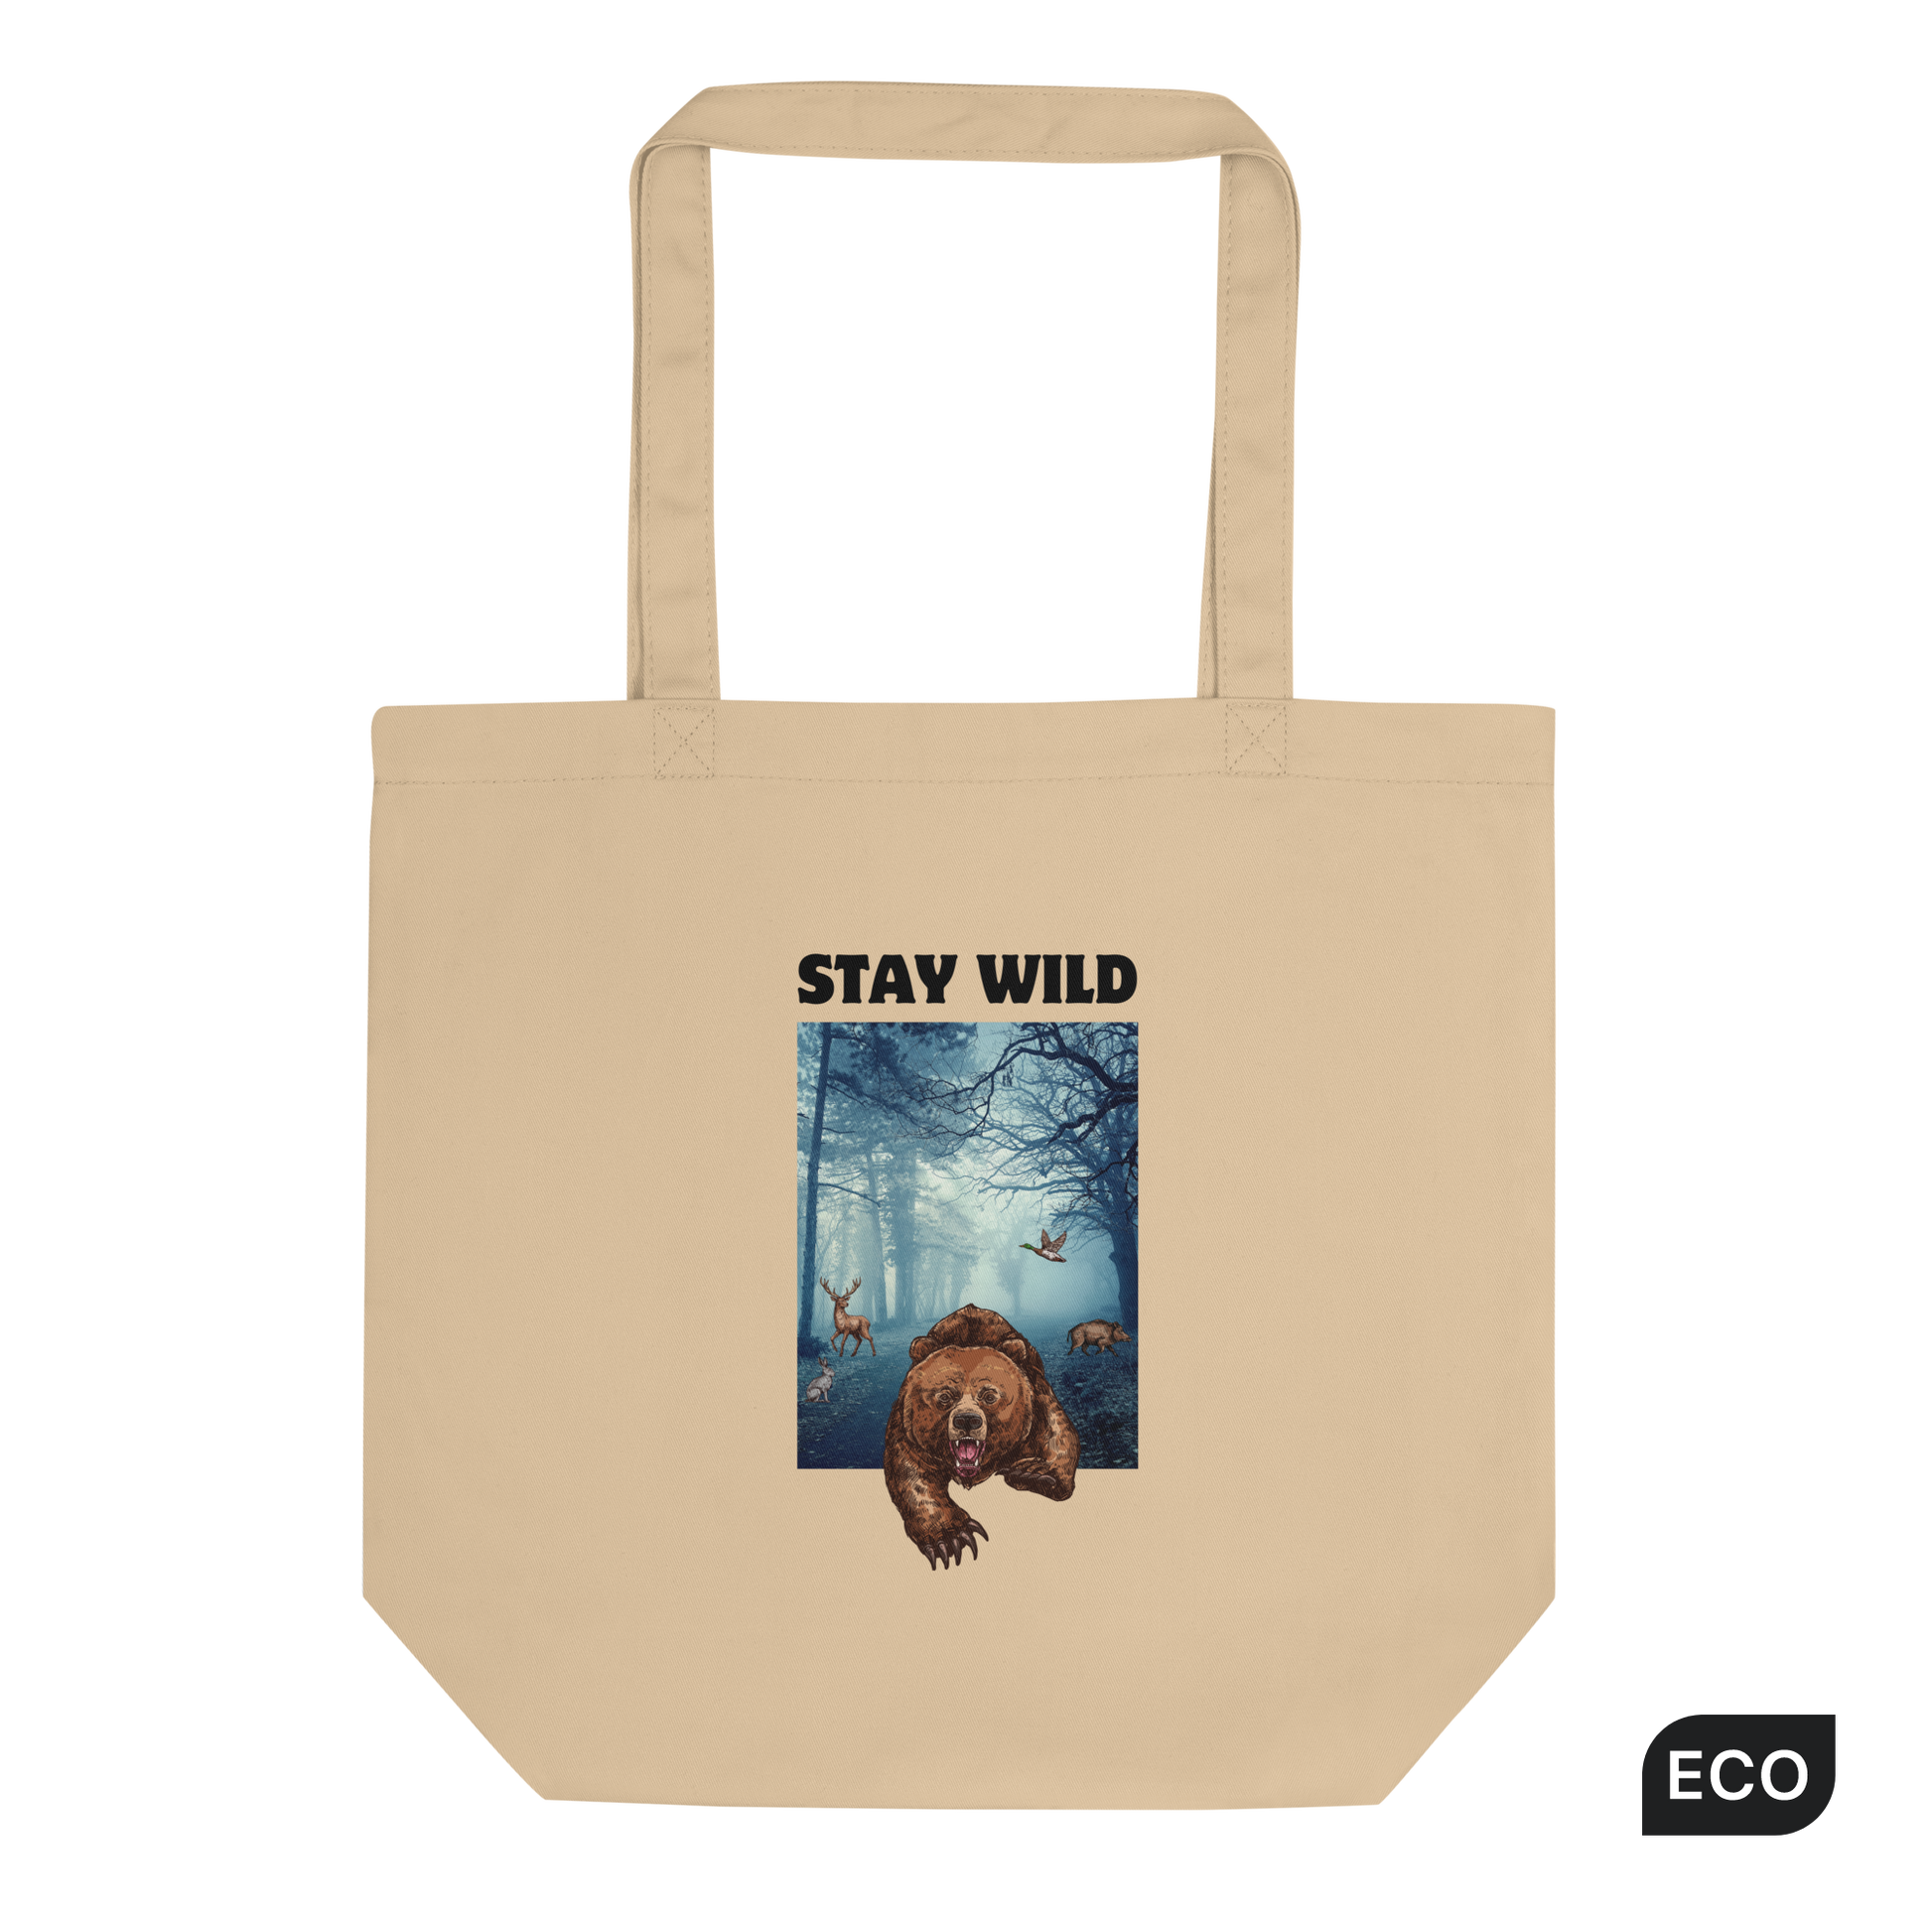 Oyster Colored Bear Eco Tote Bag featuring a Stay Wild graphic - Cool Organic Cotton Totes - Boozy Fox